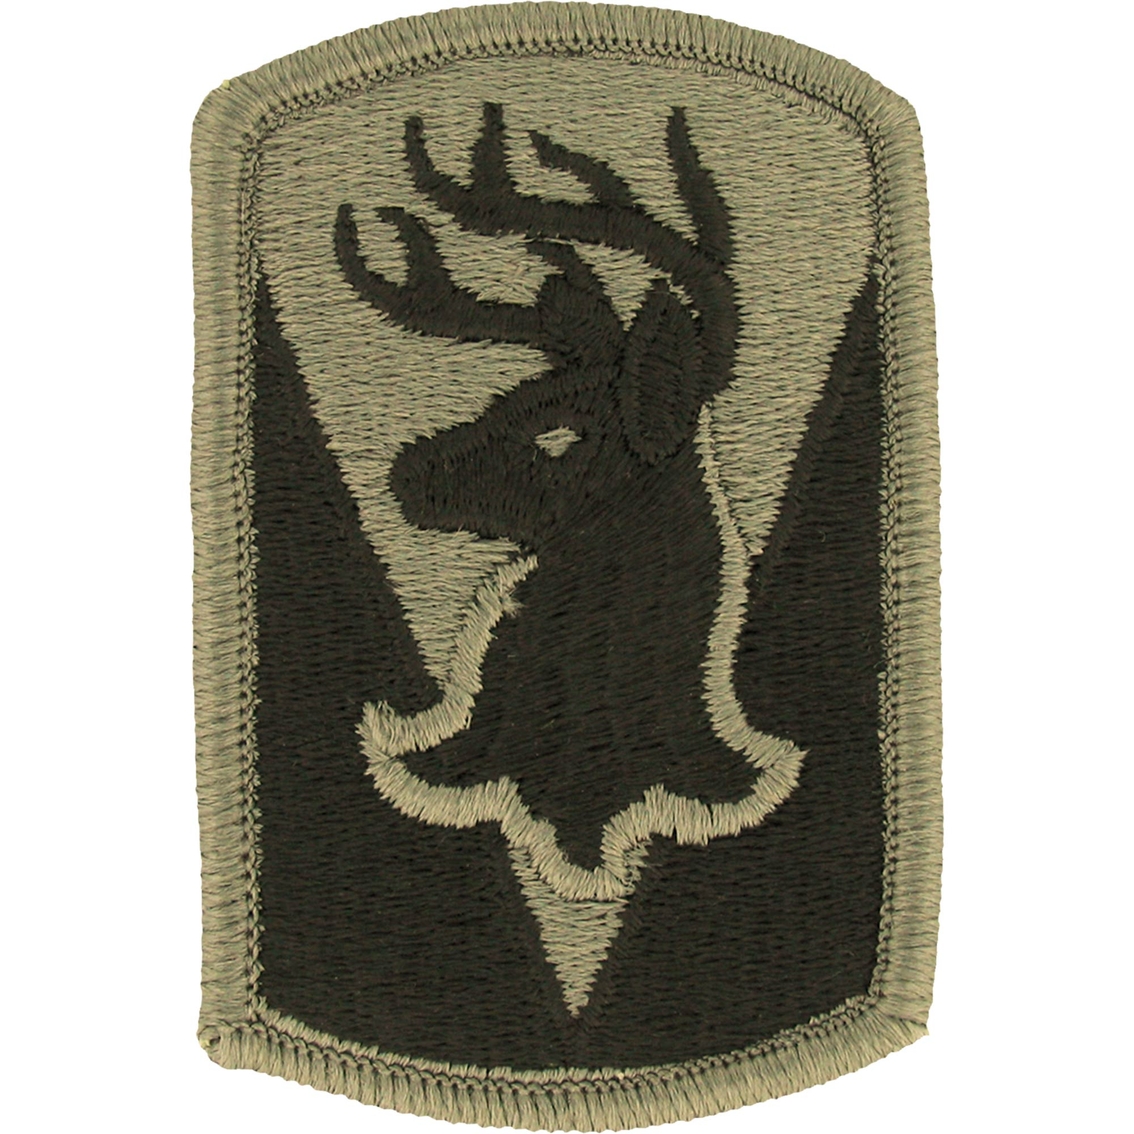 army infantry patches